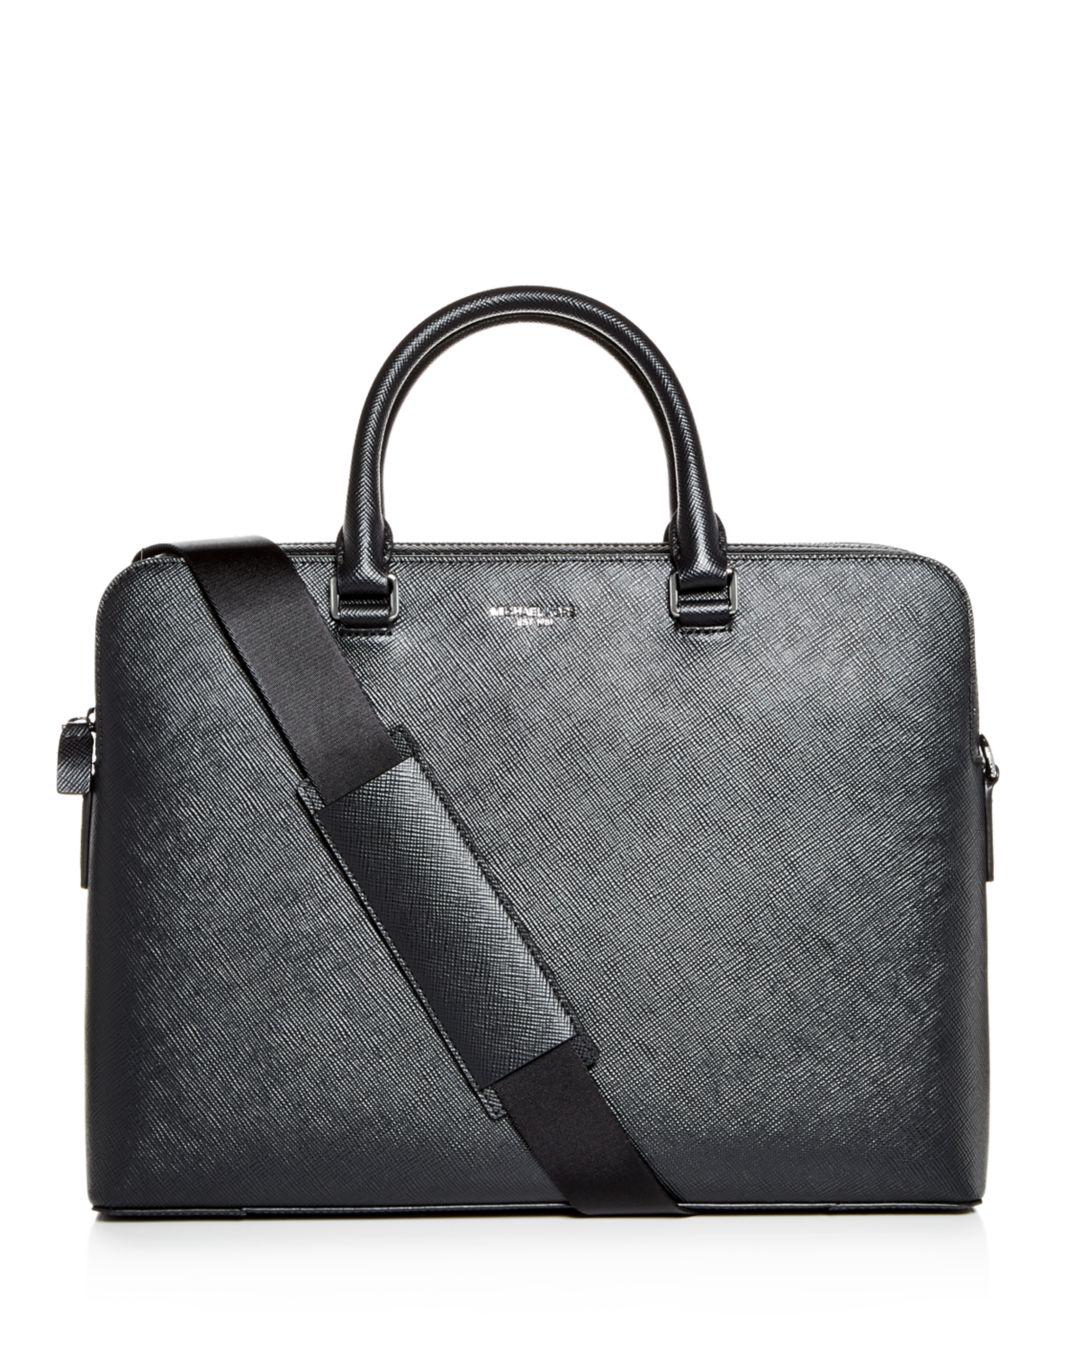 black leather travel briefcase